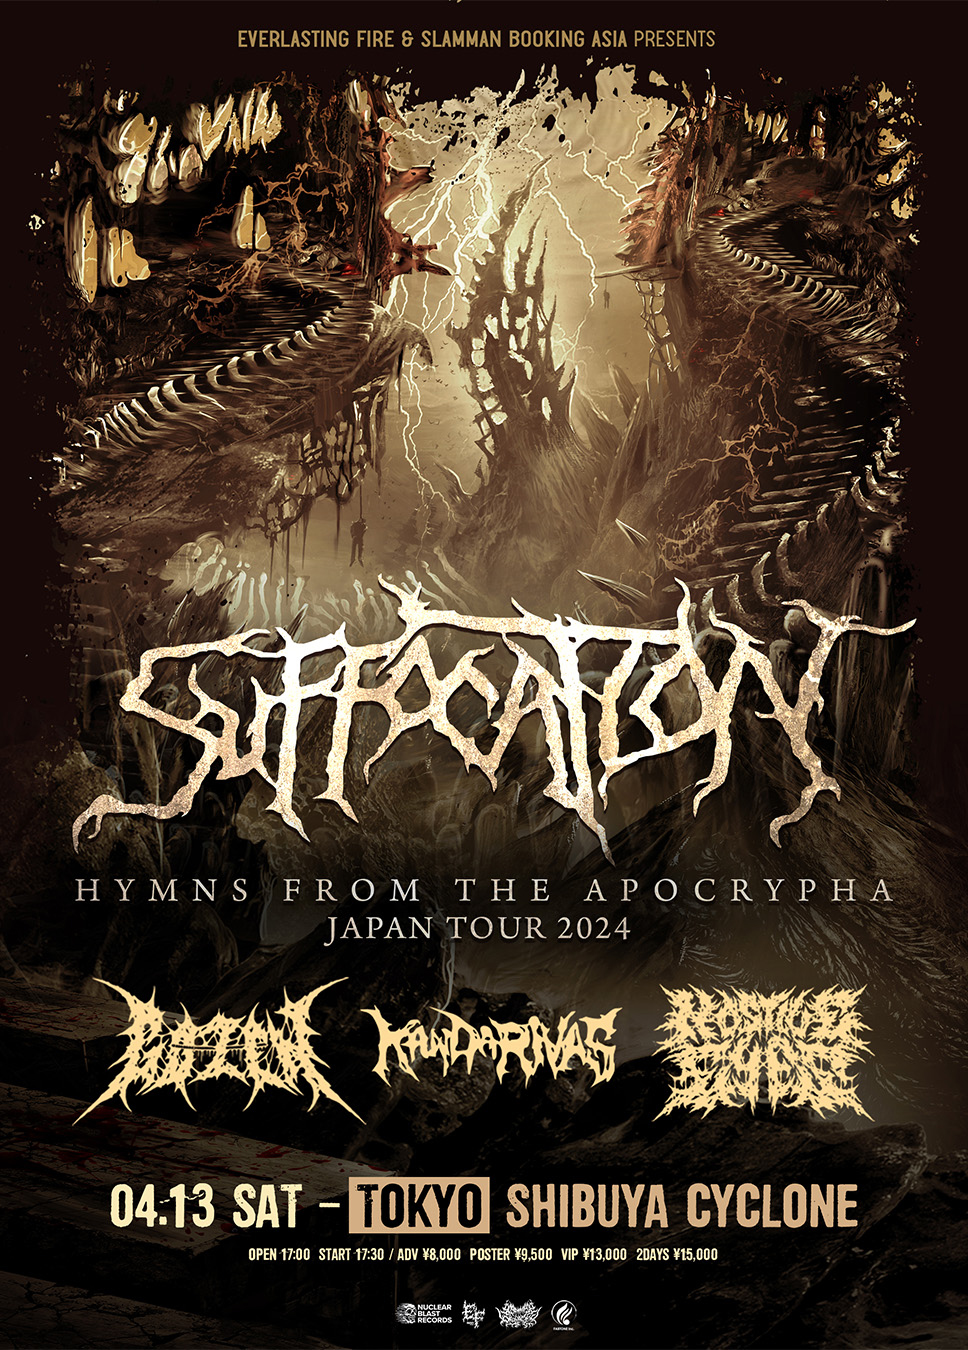 Suffocation Hymns From The Apocrypha Japan Tour 2024